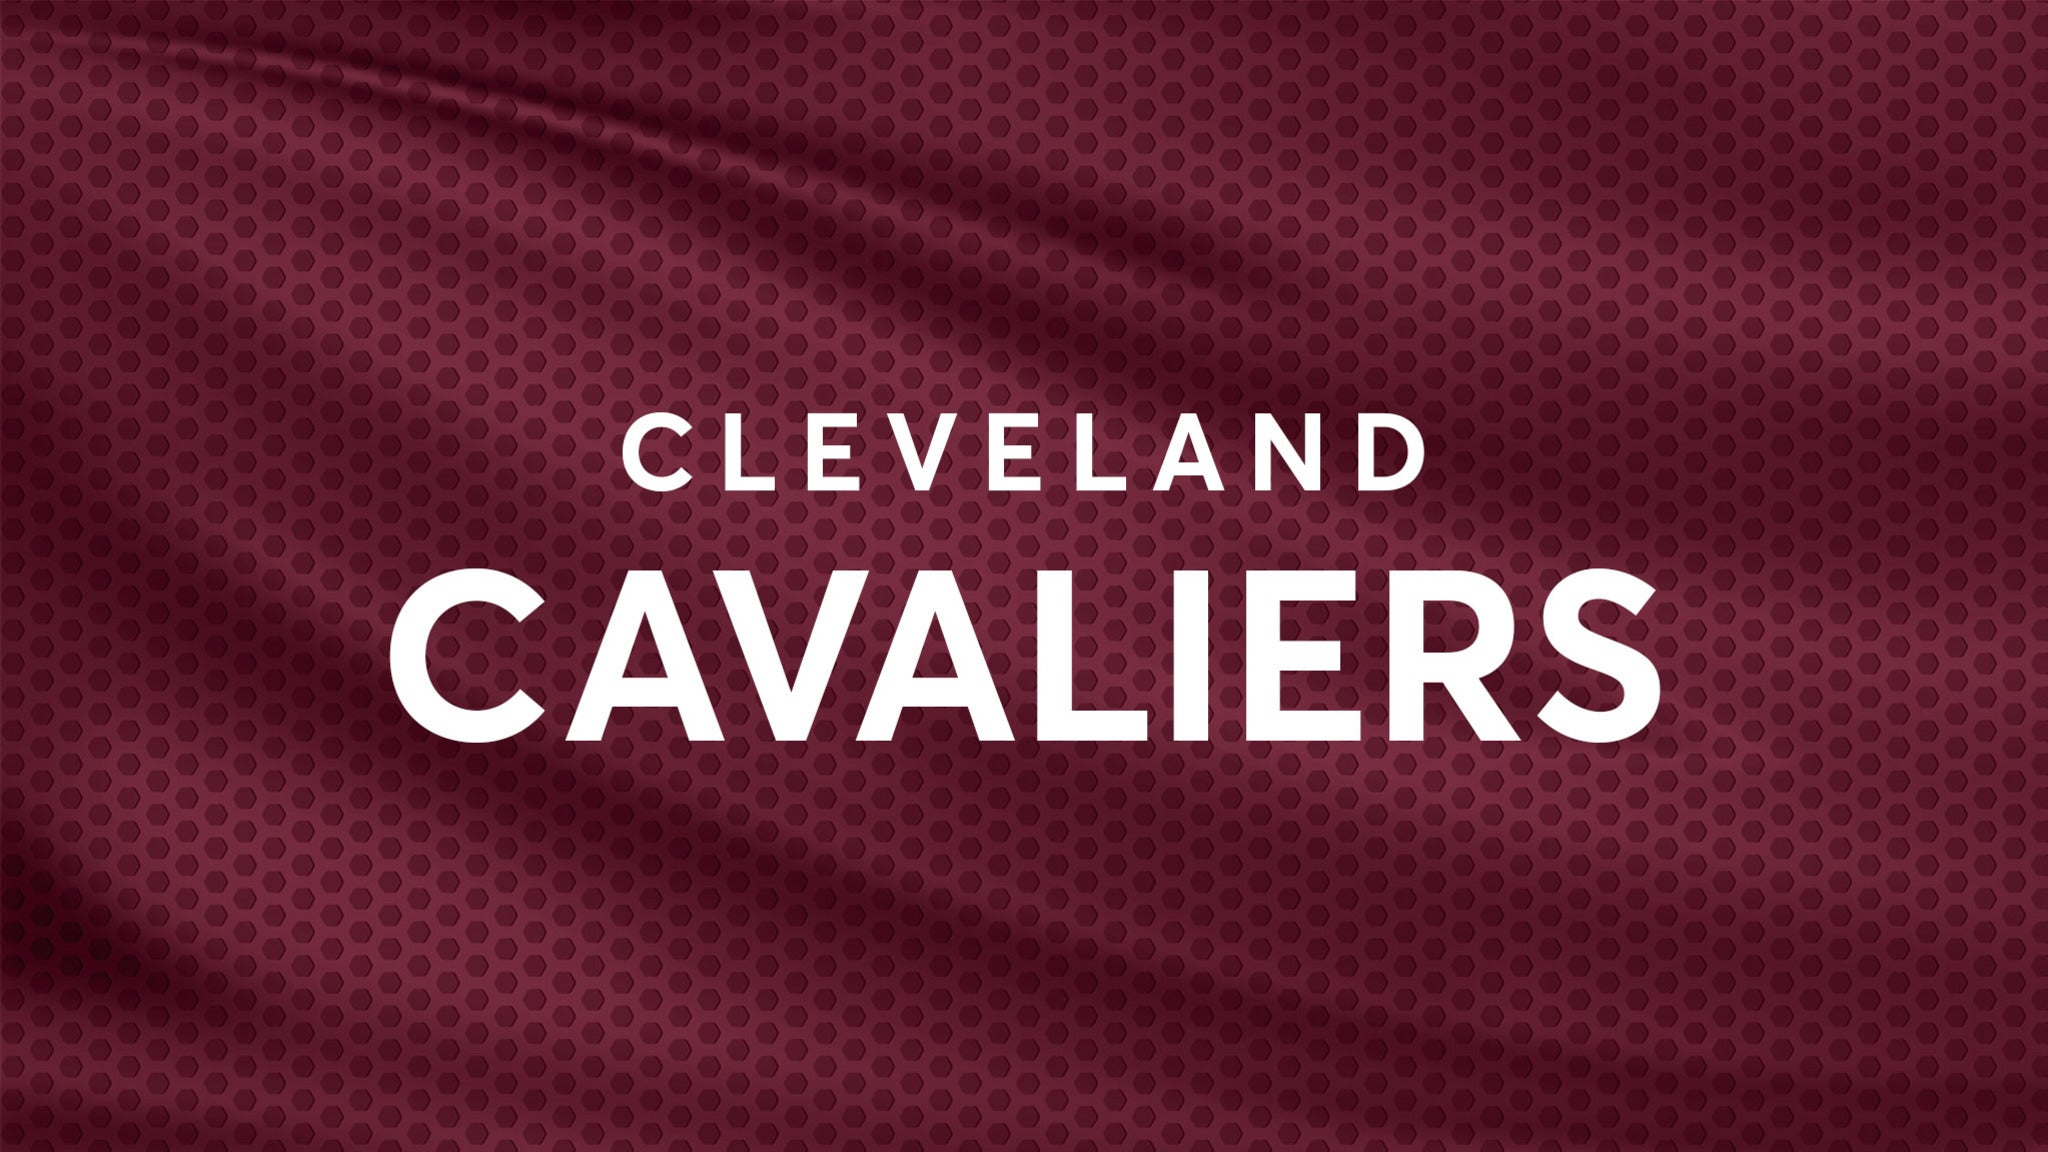 Cleveland Cavaliers vs. New Orleans Pelicans